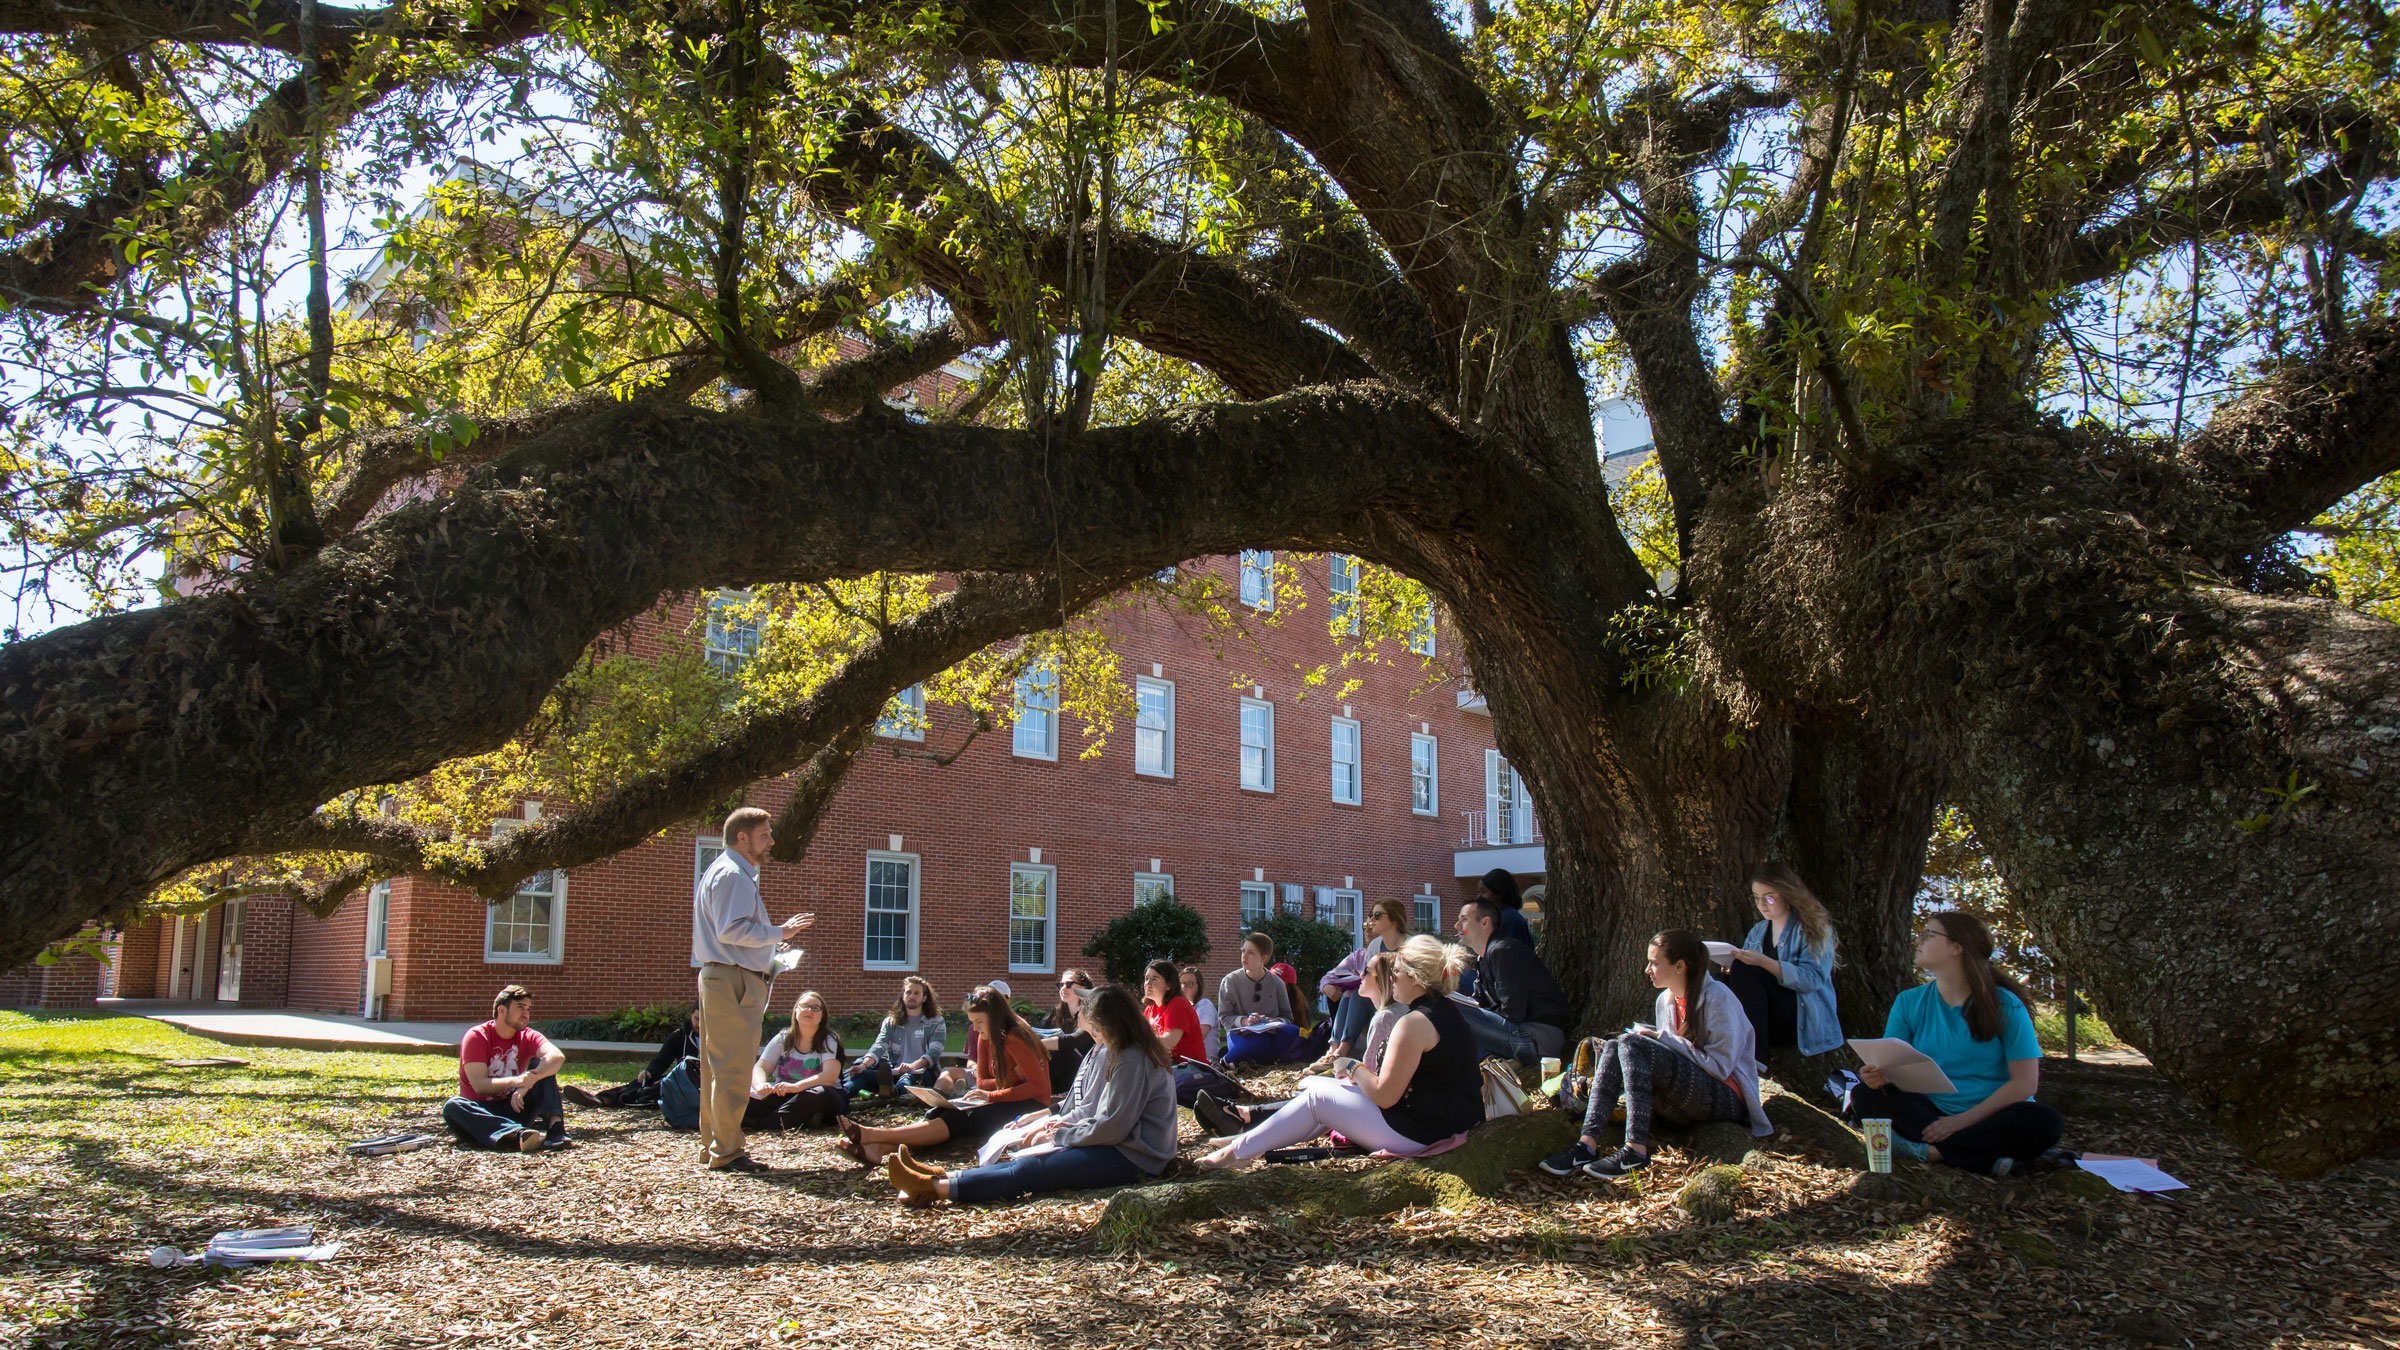 The University of Louisiana at 69ý is the best university in Louisiana for getting a personal education.